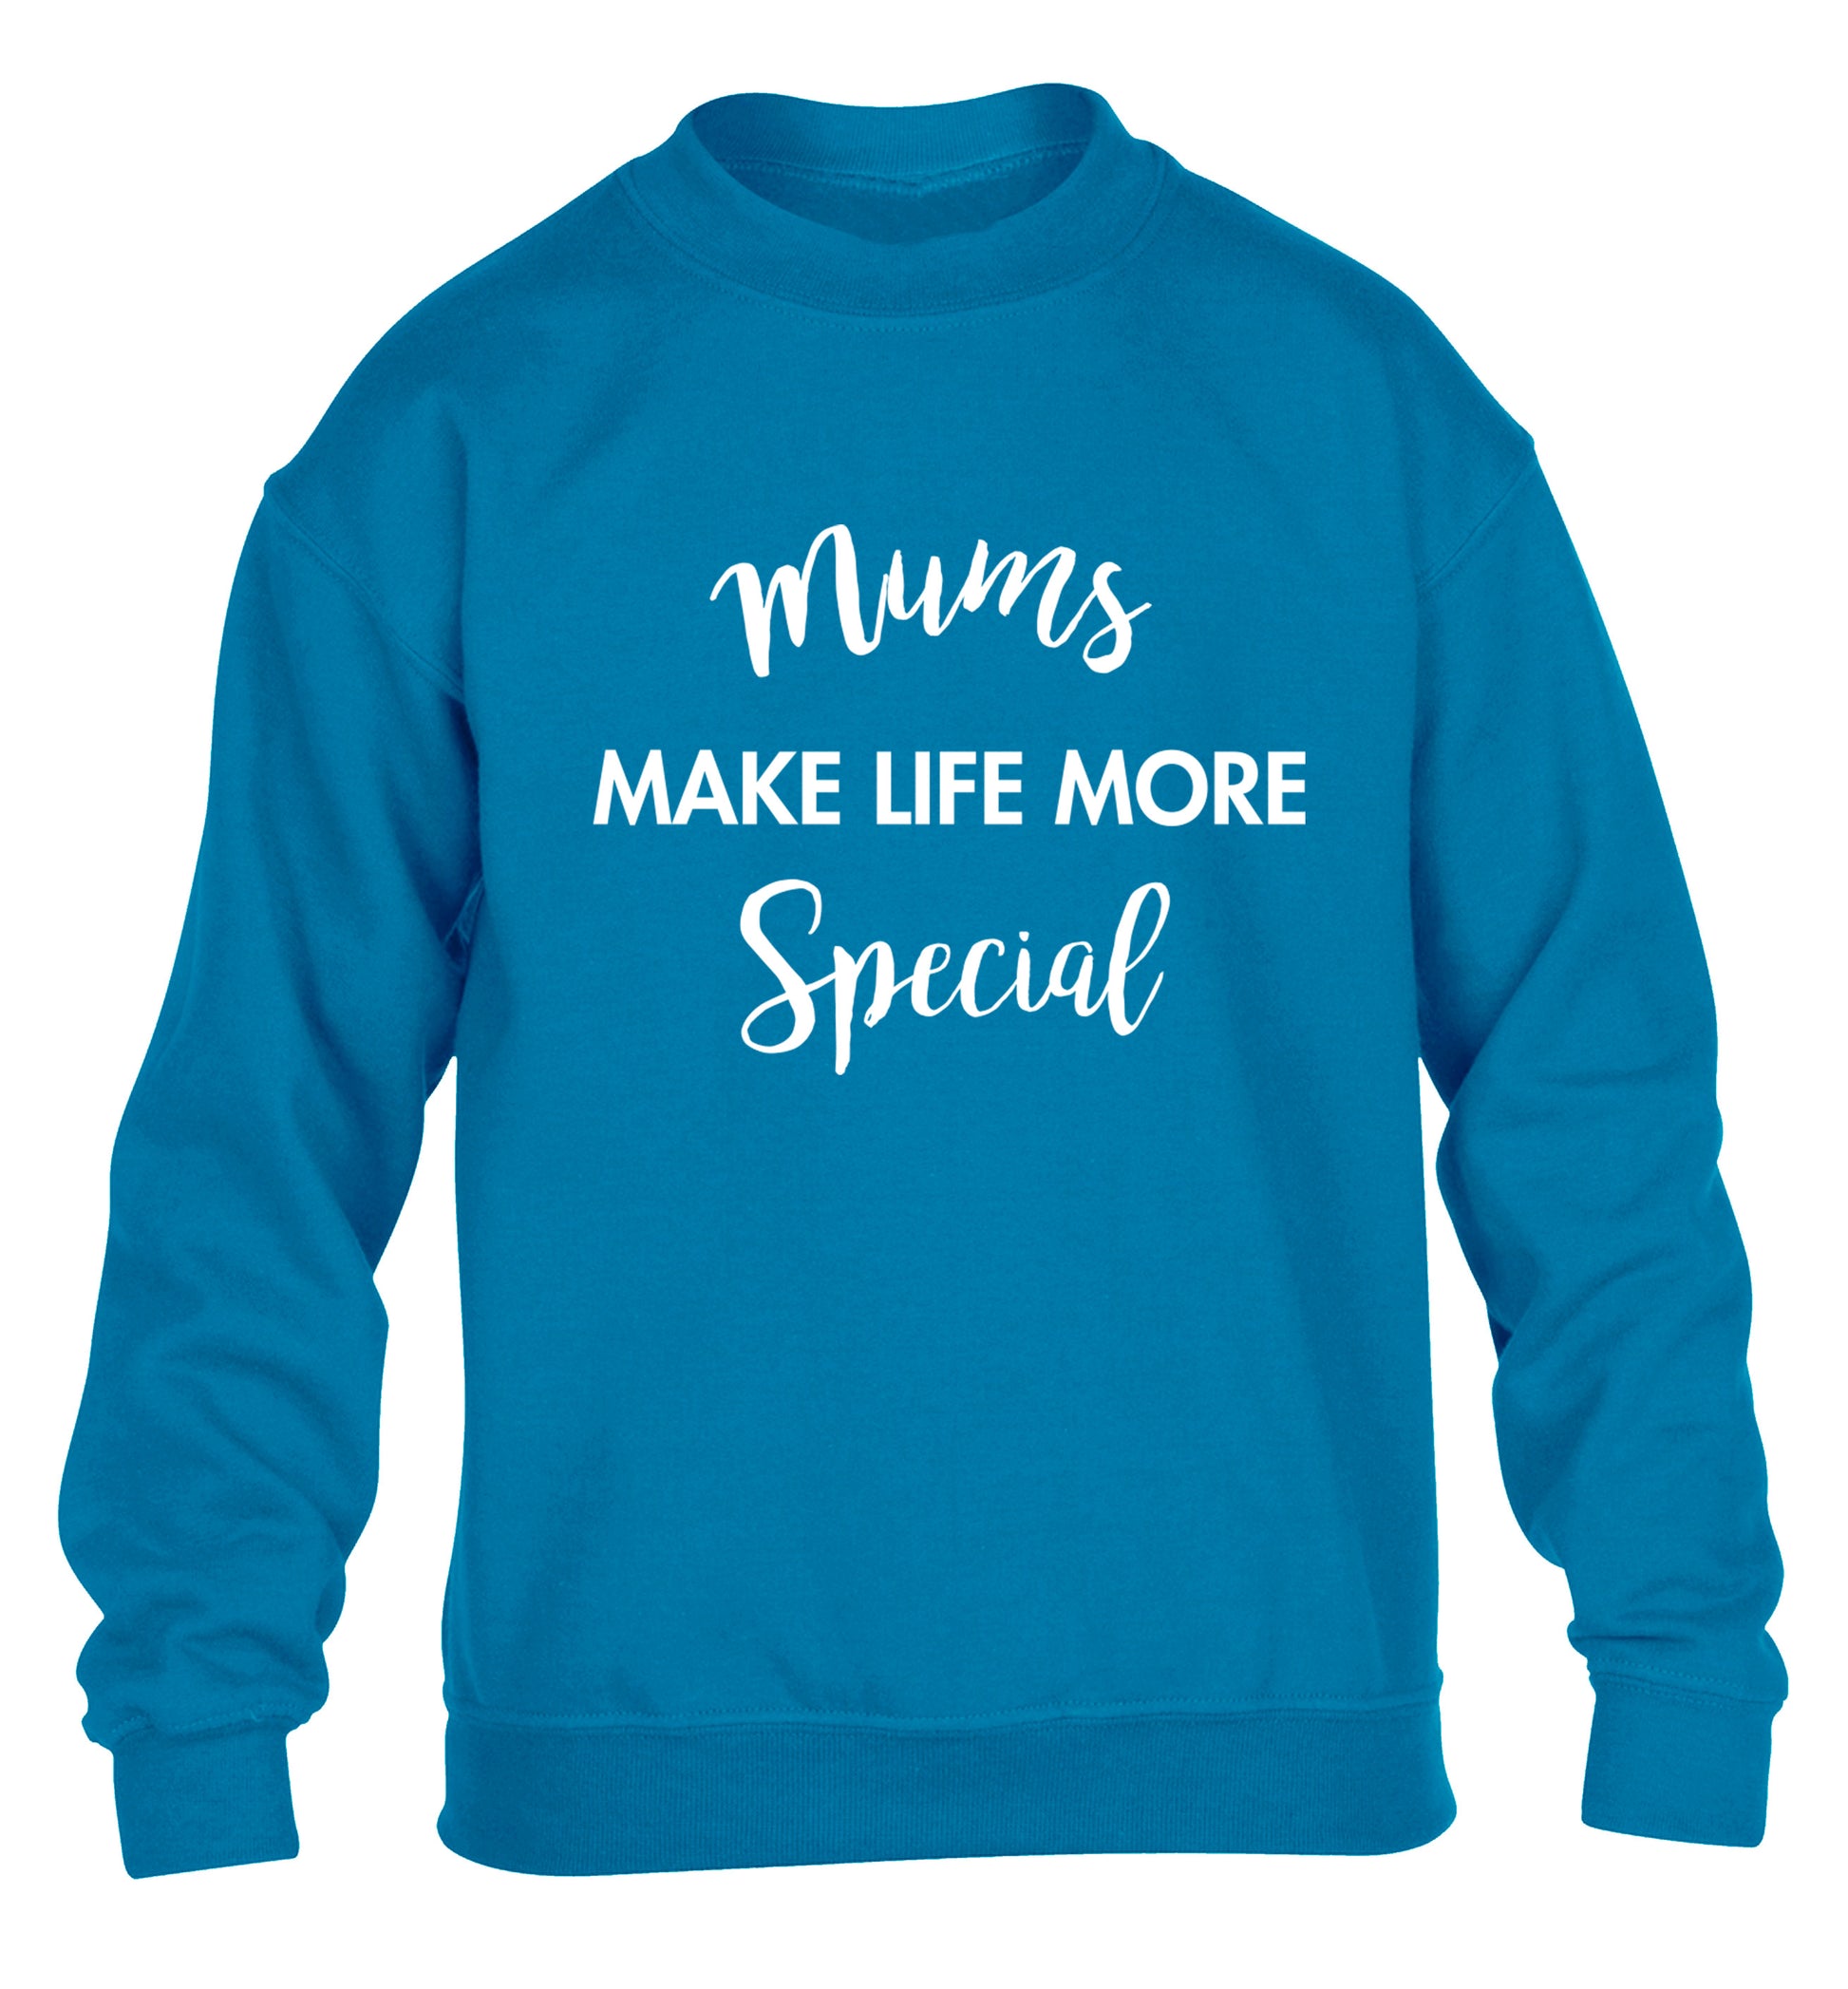 Mum's make life more special children's blue sweater 12-13 Years